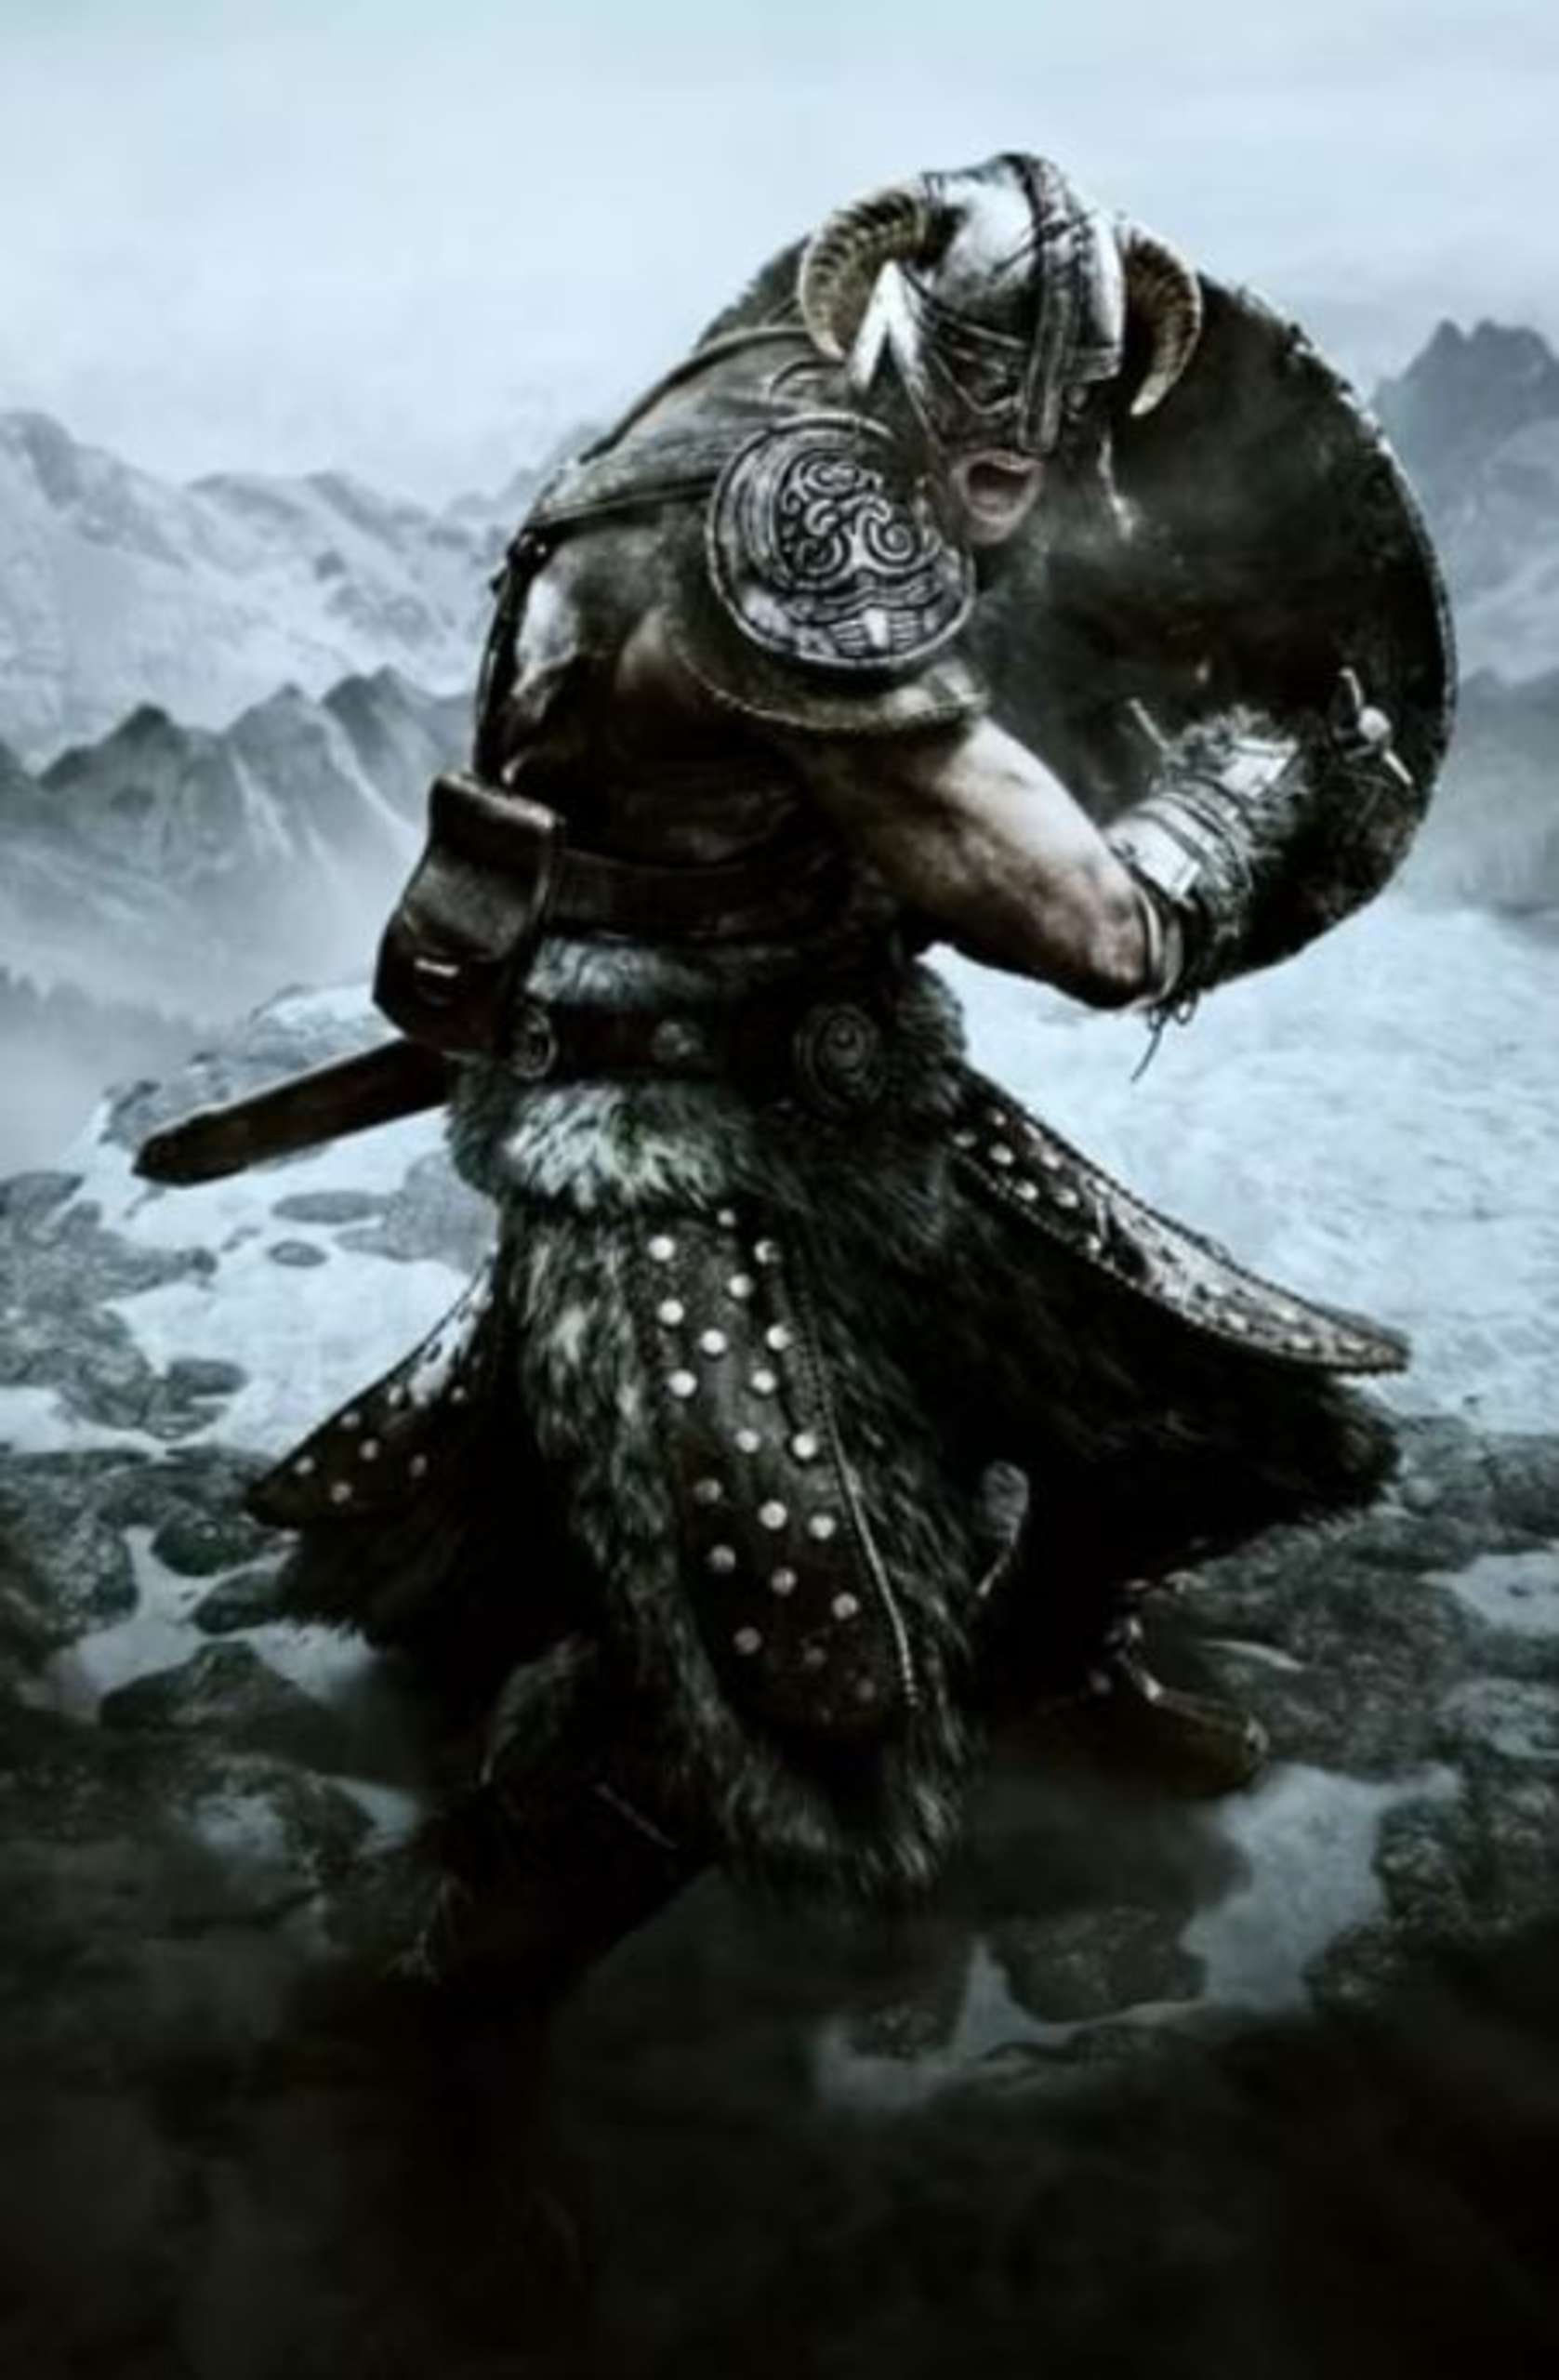 Skyrim’s Dragonborn Having The Legal Authority To Serve As Jarl Is A Long-Awaited Request From The Game’s Fanbase